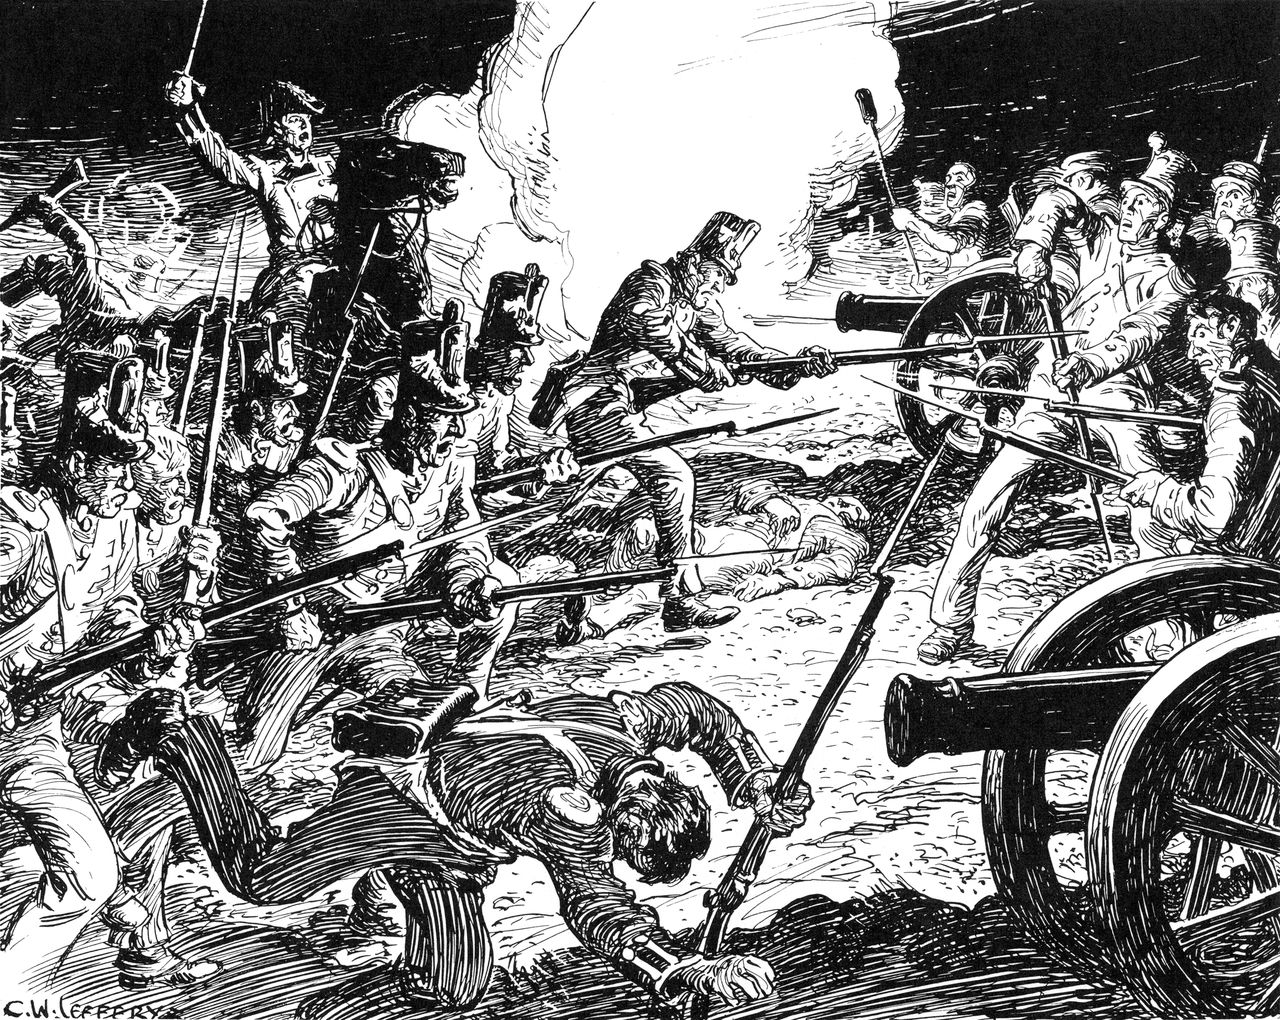 Black and white drawing depicting several men fighting with rifles and cannons on a battlefield.